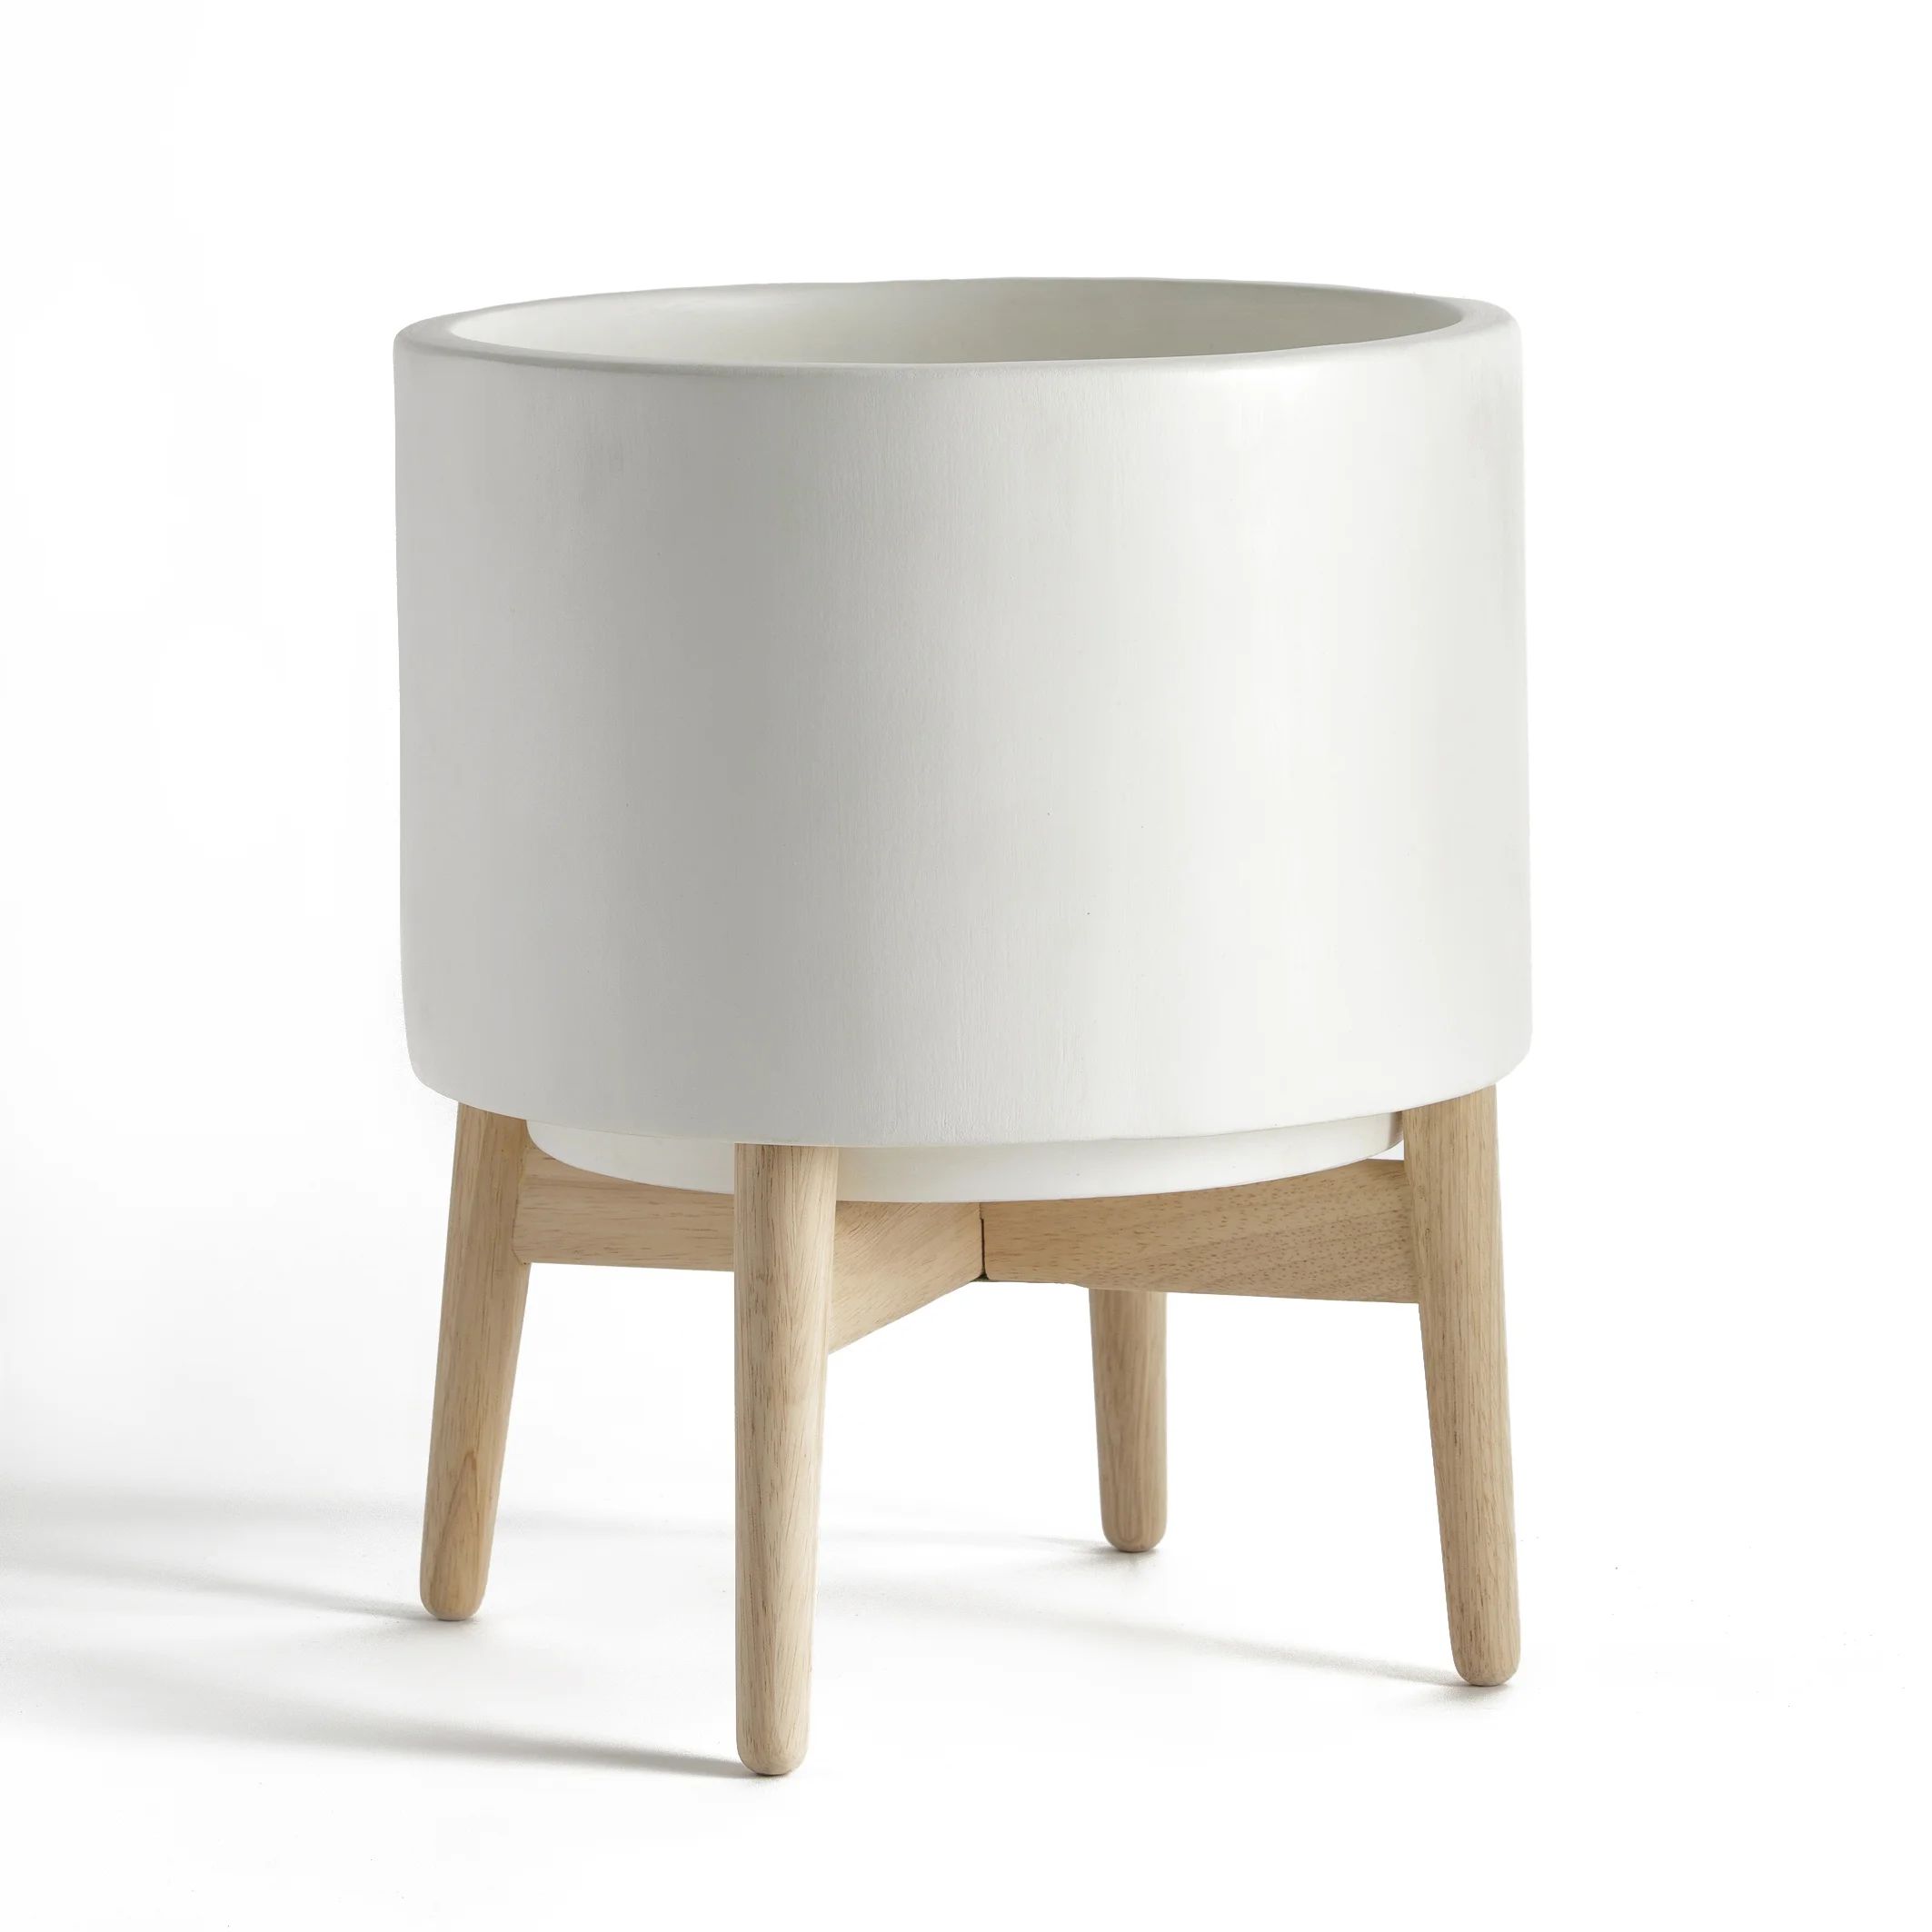 Florian Ceramic Planter with Wooden Stand | La Redoute (UK)